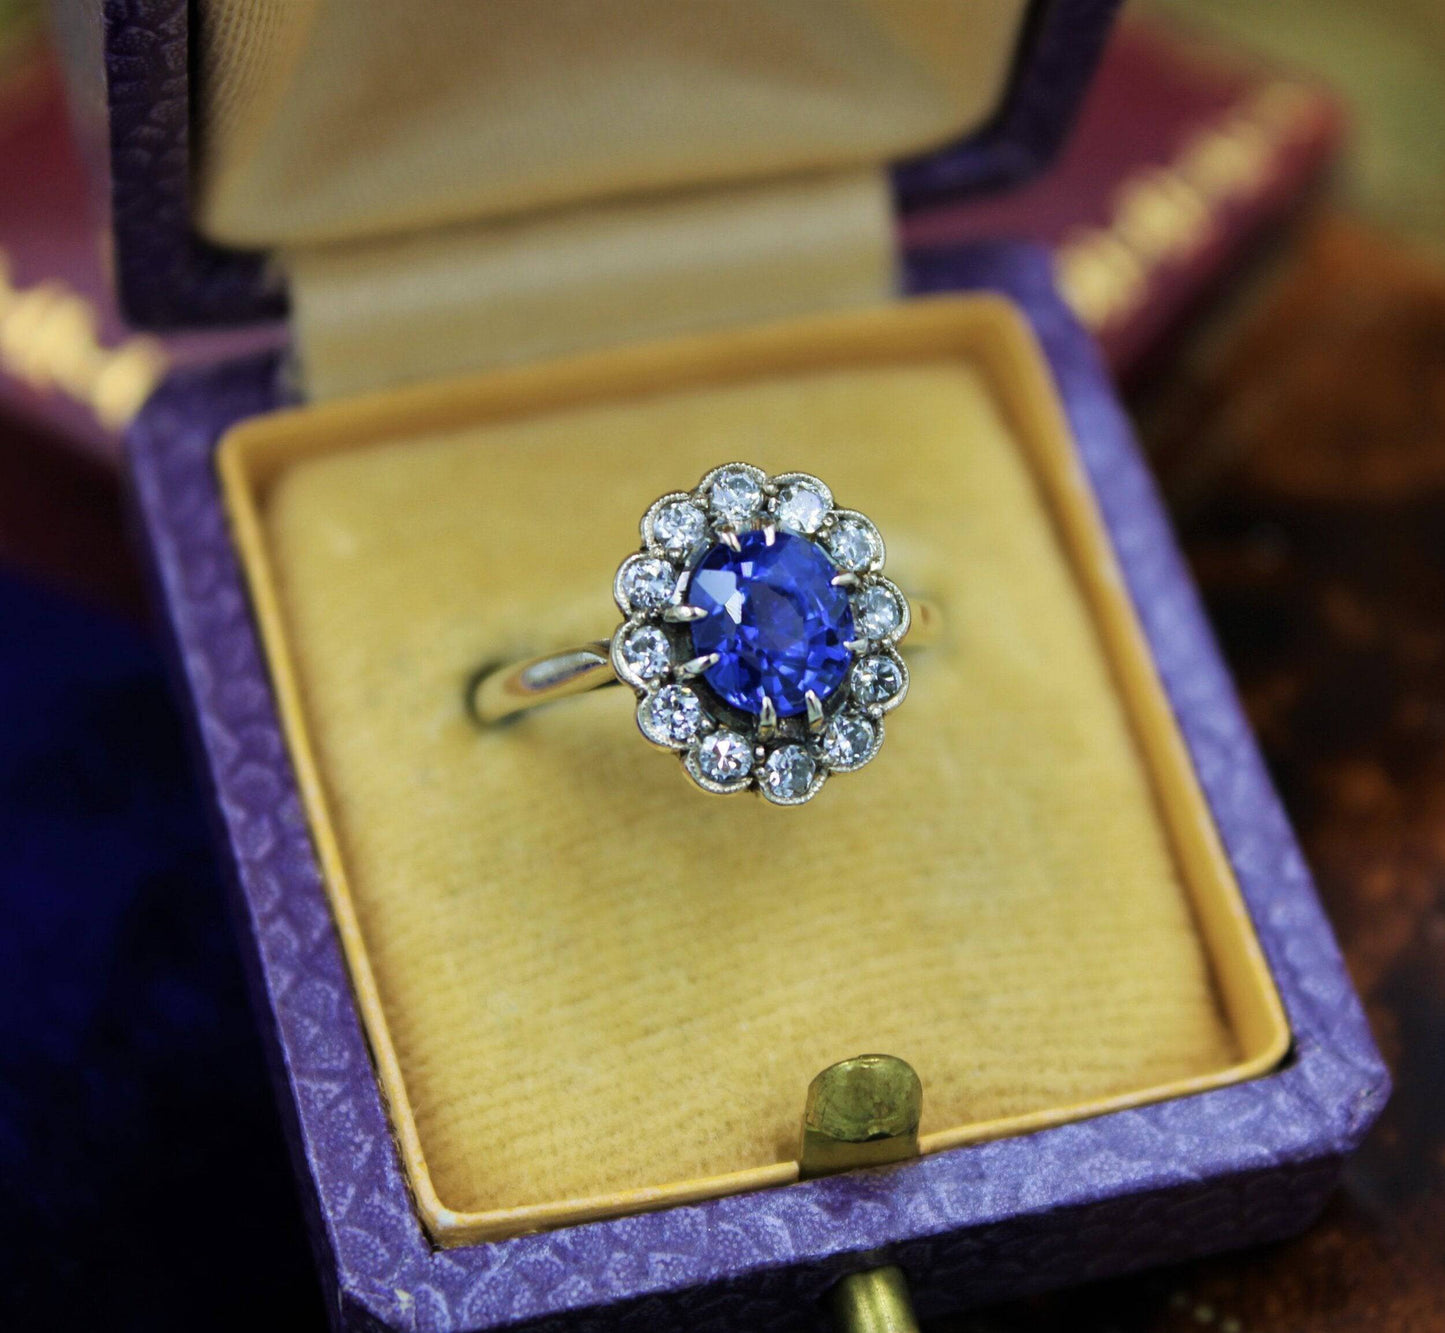 A very fine Sapphire & Diamond Cluster Ring mounted in 14ct White Gold, Continental, Circa 1930 - Robin Haydock Antiques